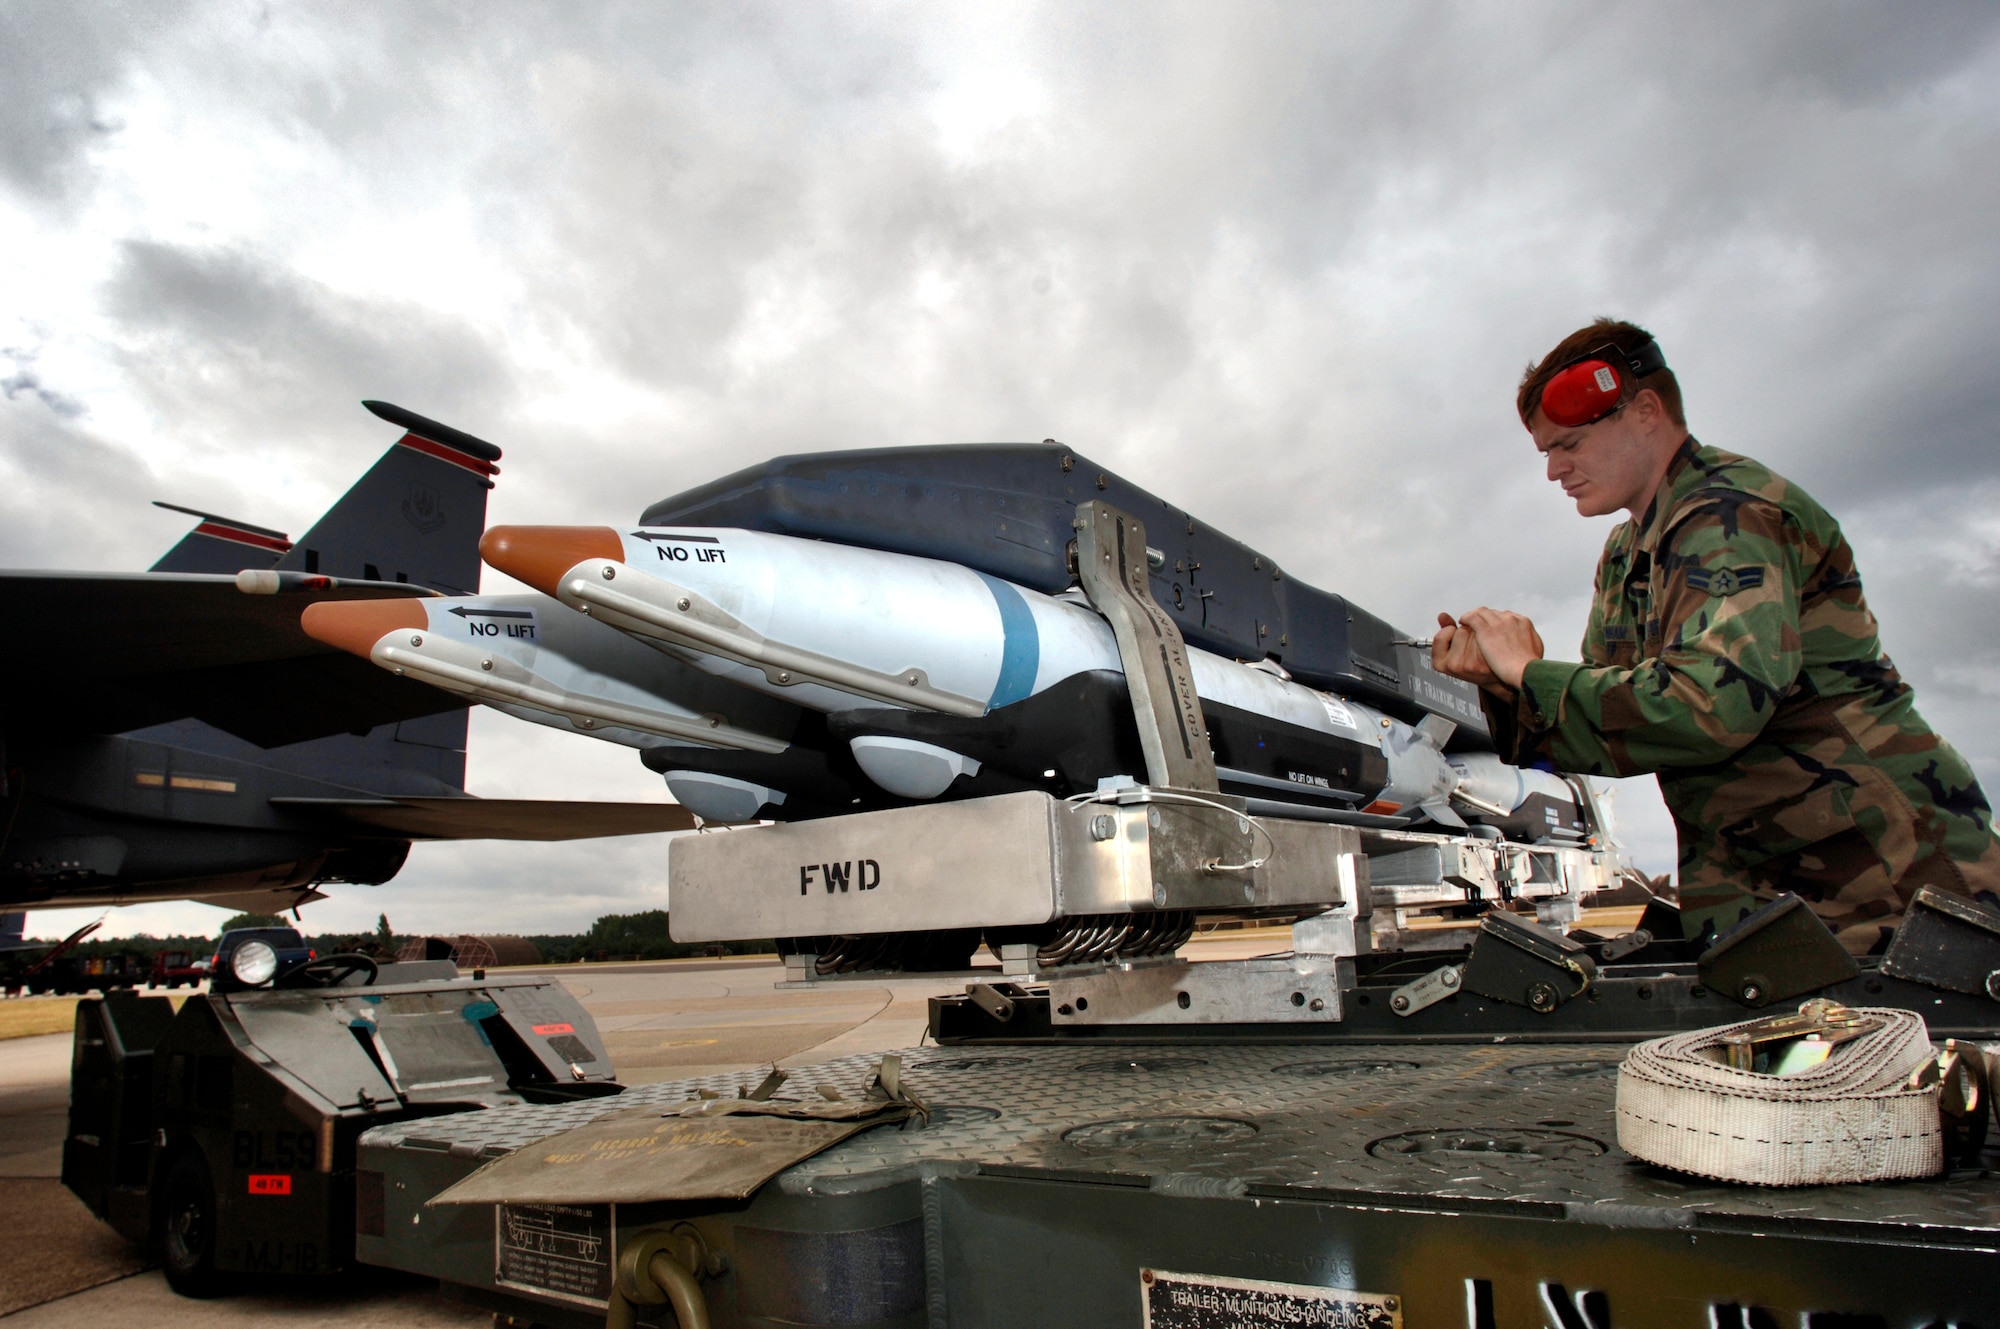 Airman 1st Class Robert Branham prepares a Bomb Rack Unit-61 for loading onto an F-15E Strike Eagle at Royal Air Force Lakenheath, England, on Aug. 1. The bomb rack and carrier comes loaded with Guided Bomb Unit-39 small-diameter bombs. The Airman is an aircraft weapons specialist with the 48th Aircraft Maintenance Squadron. (U.S. Air Force photo/Master Sgt. Lance Cheung) 